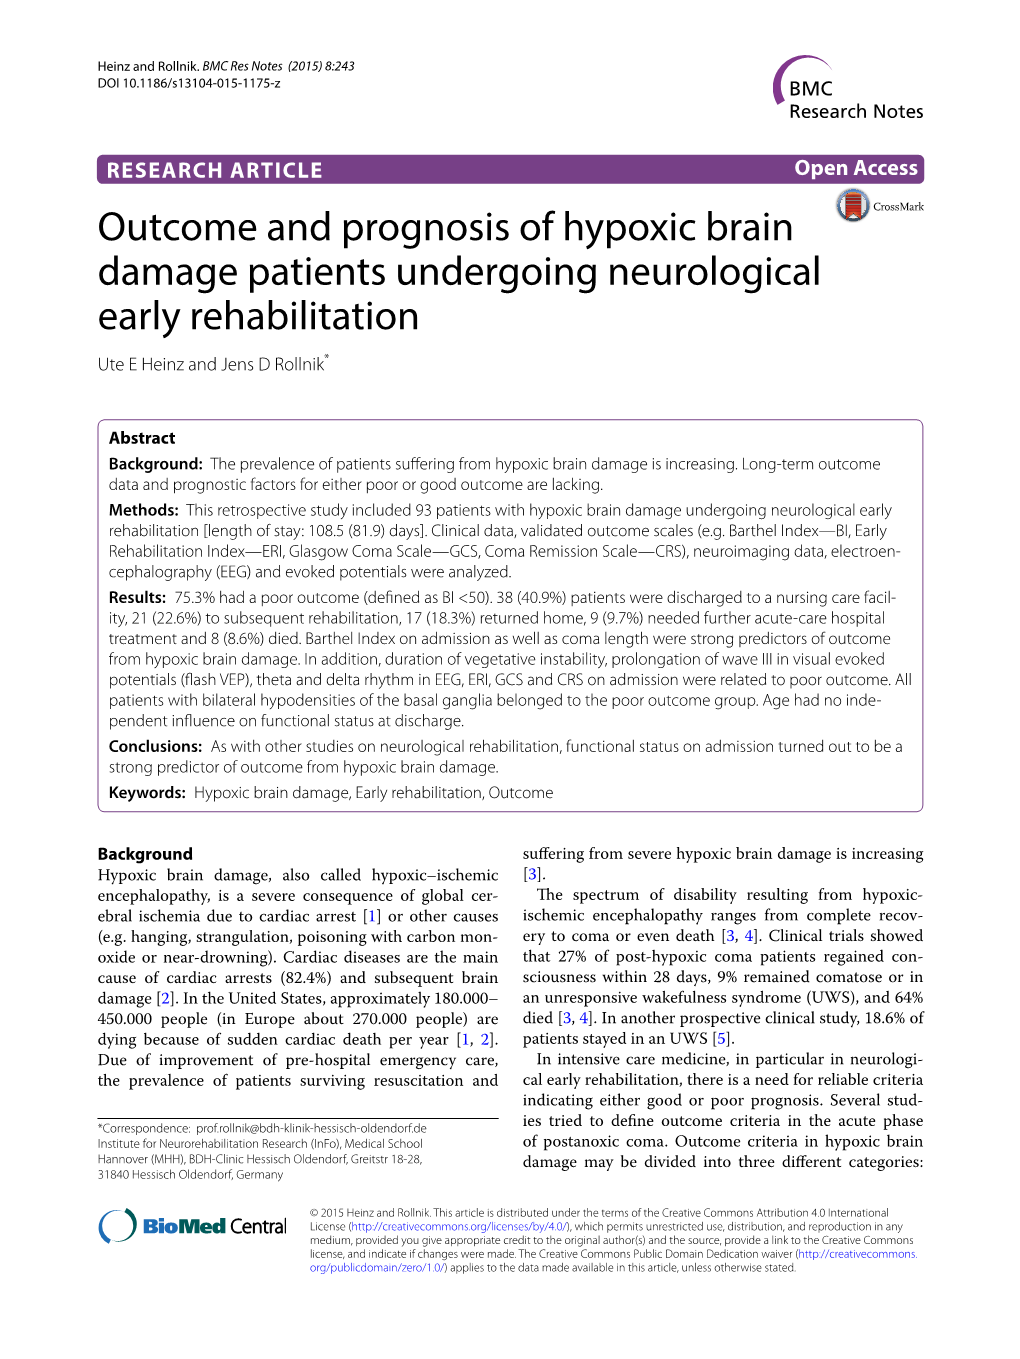 Outcome and Prognosis of Hypoxic Brain Damage Patients Undergoing Neurological Early Rehabilitation Ute E Heinz and Jens D Rollnik*